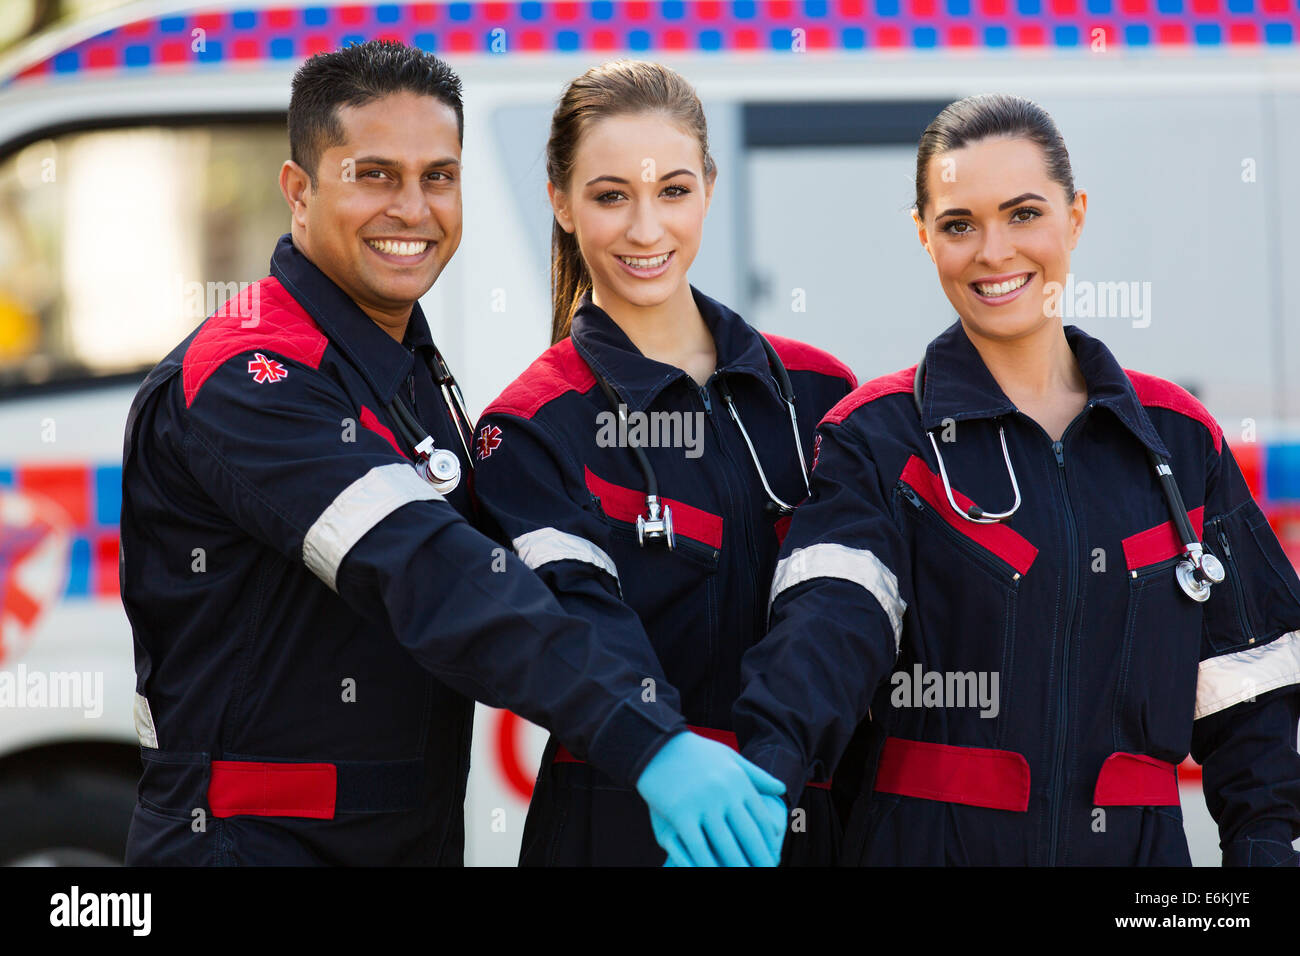 group of paramedics hands together in front of ambulance Stock Photo